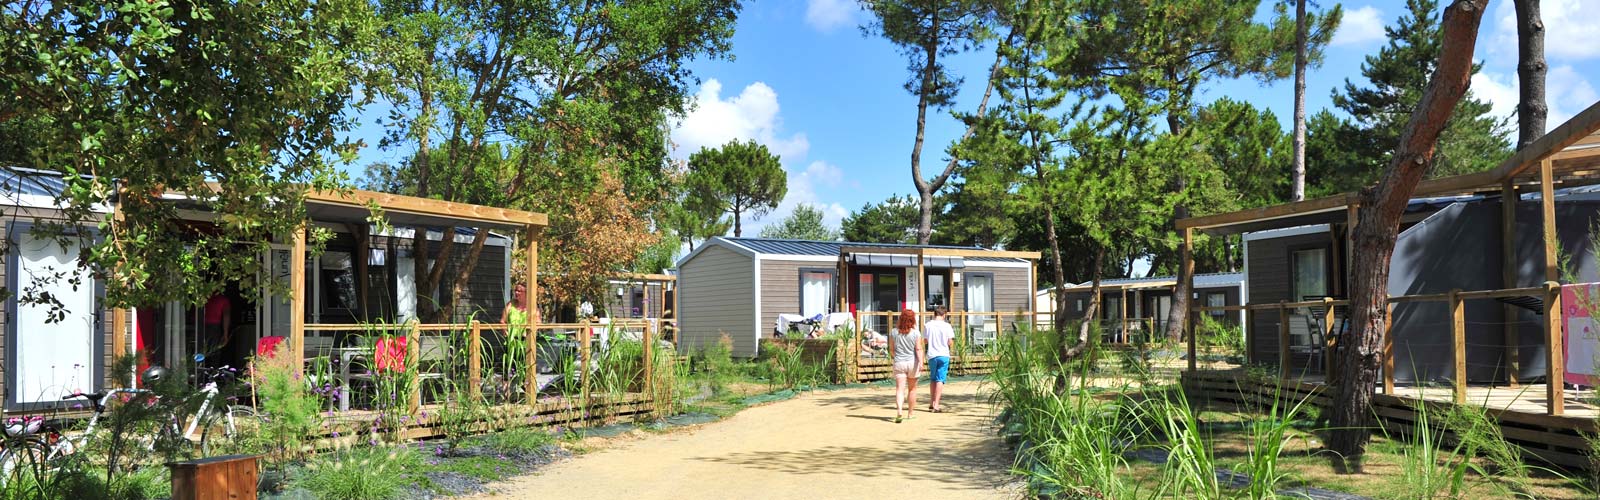 Mobile homes for rent in Saint-Brevin in a 5-star campsite